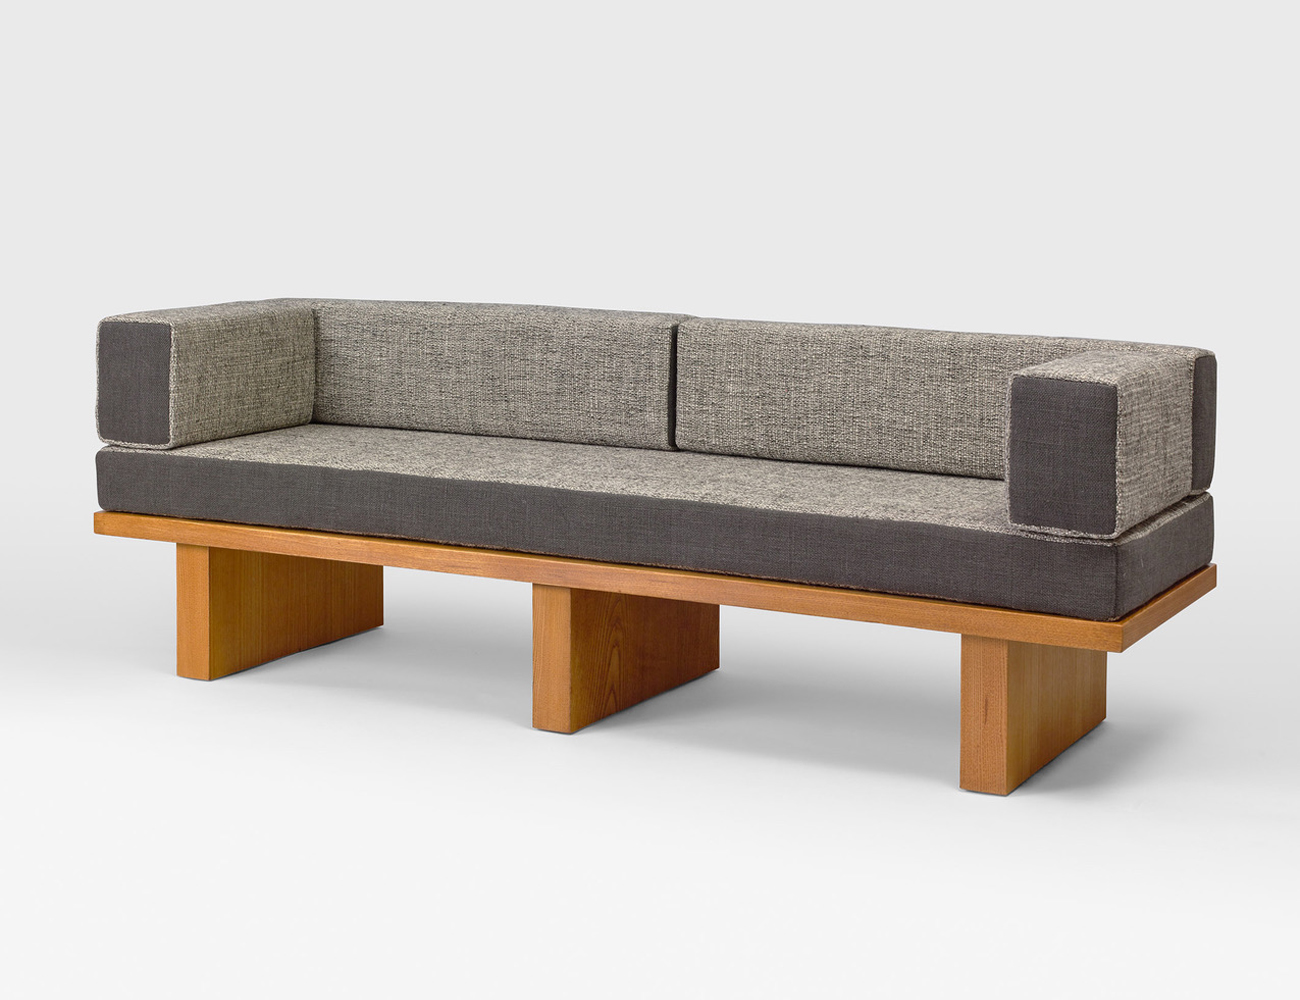 Charlotte Perriand, bench, circa 1957 - Galerie Jacques Lacoste